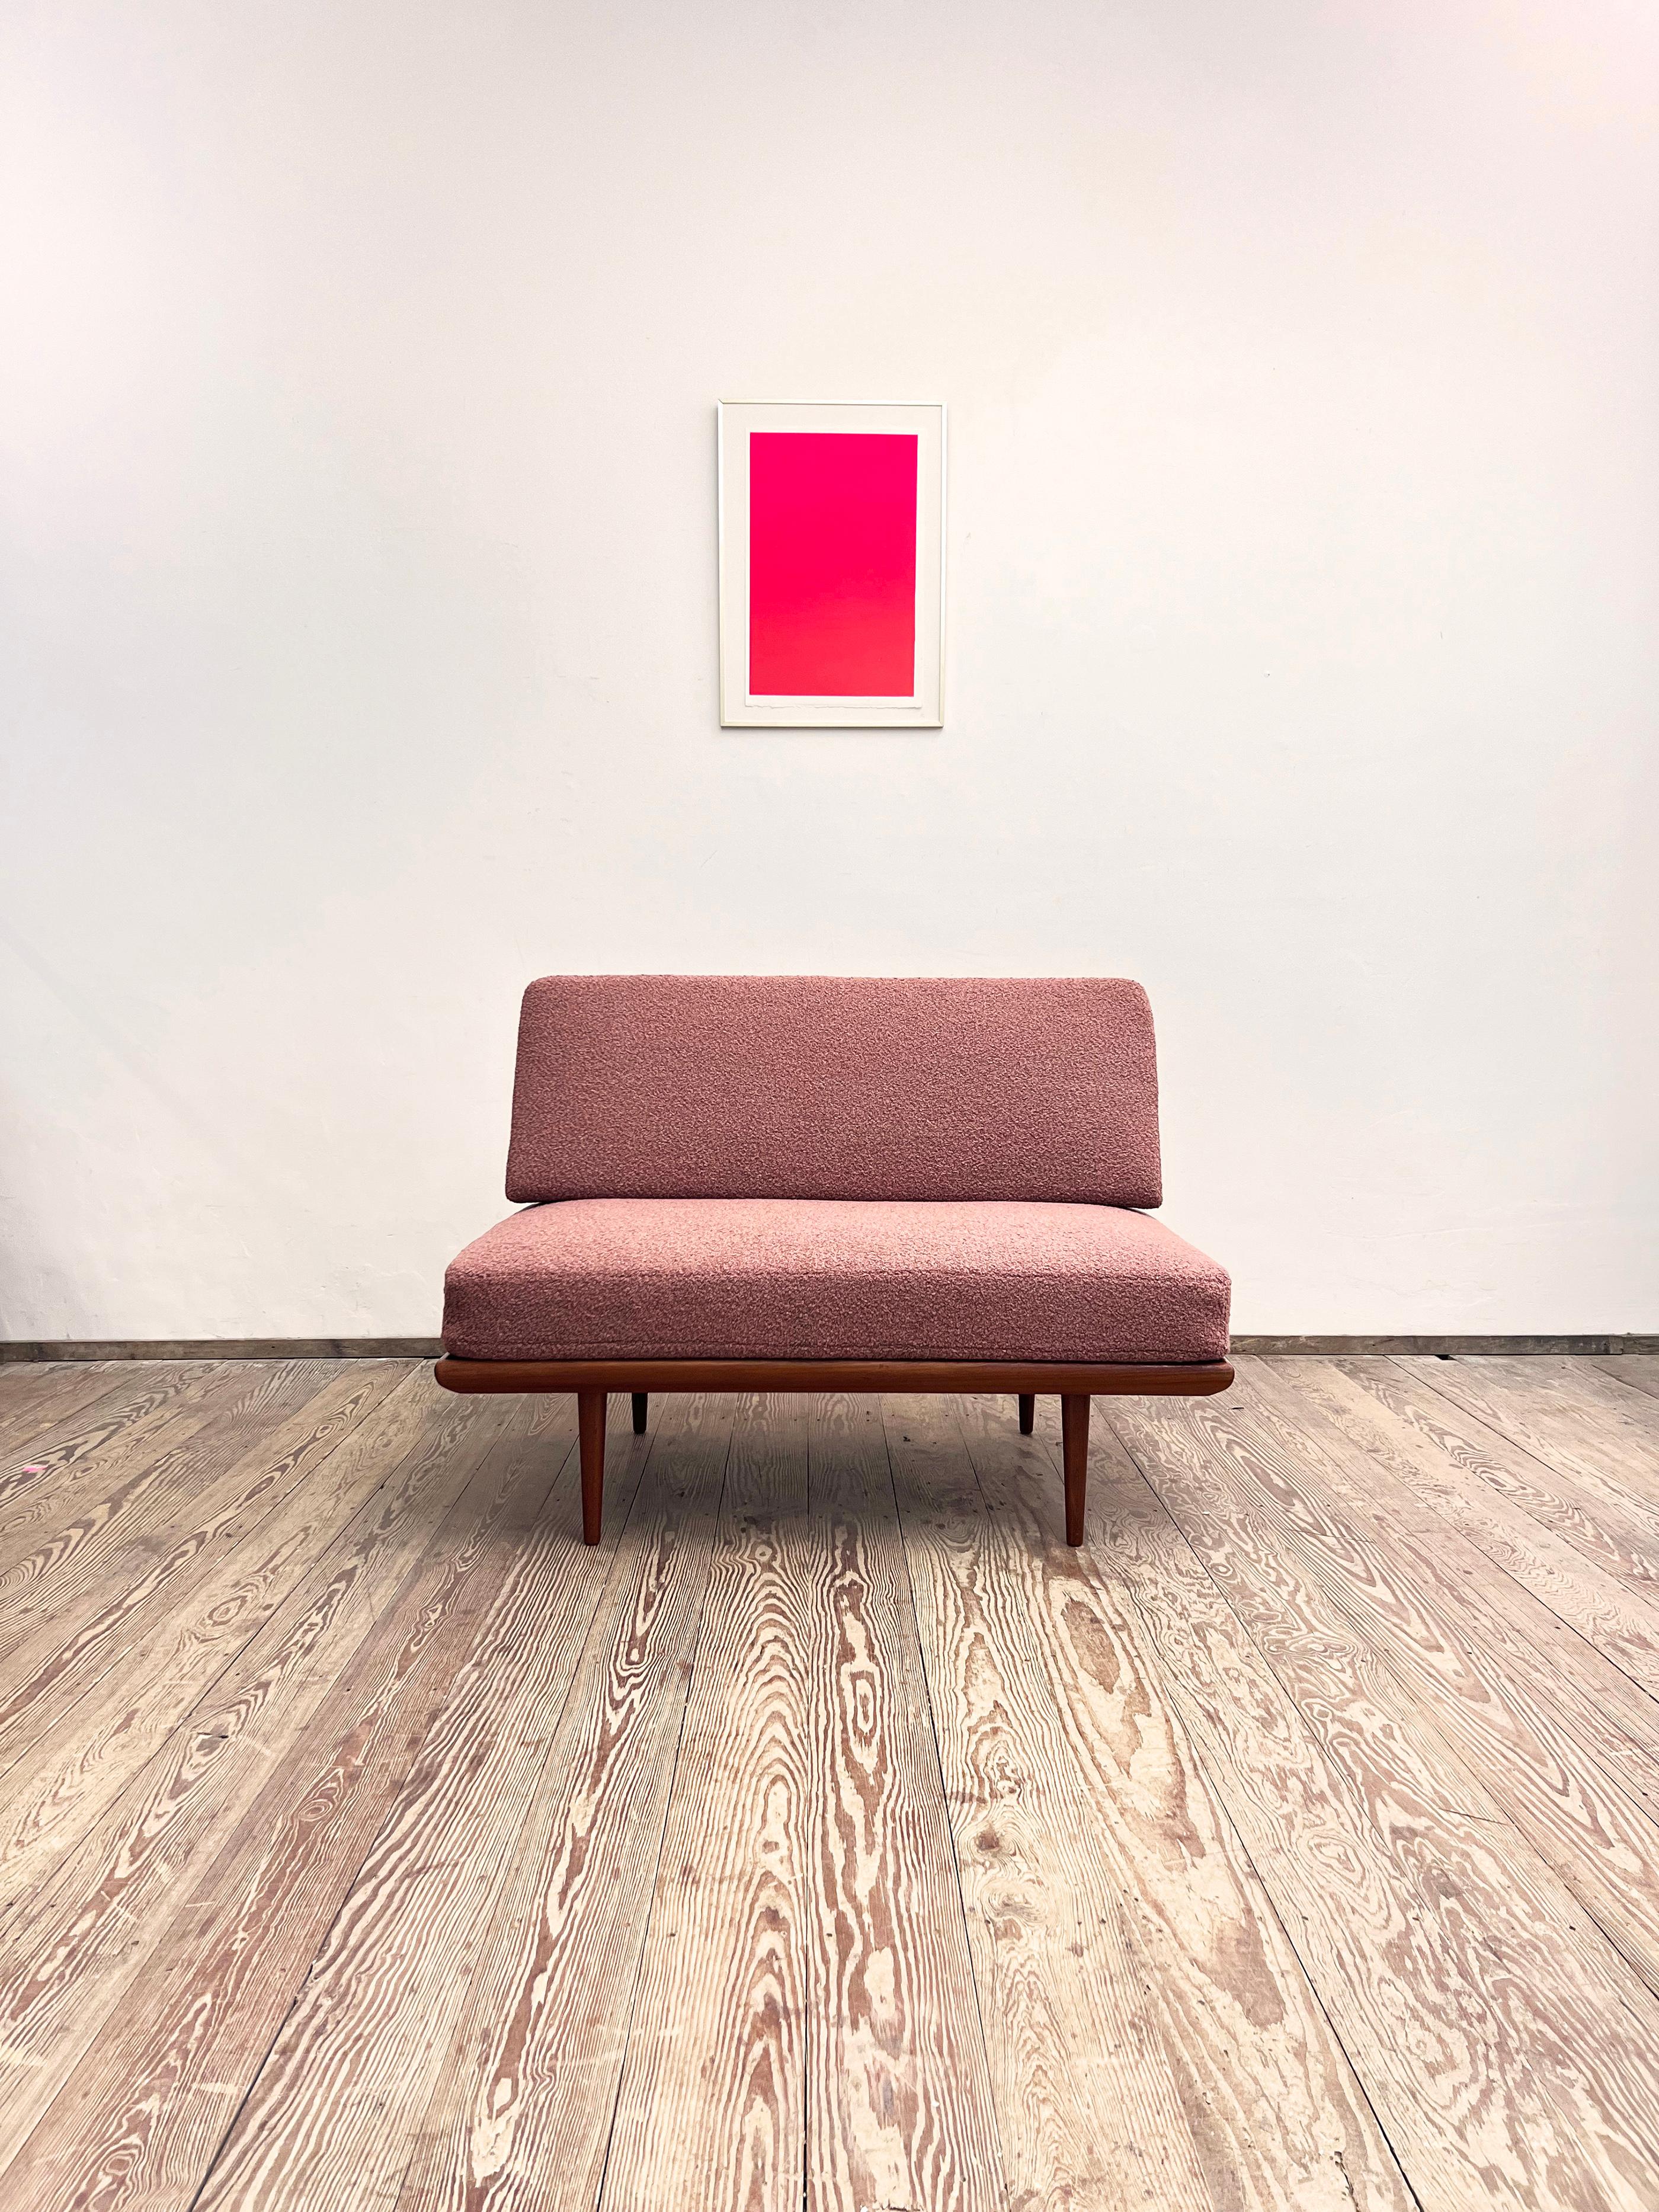 Dimensions 125 x 80 x 85 x 43 cm  (WxDxHxSH)

This shapely and comfortable sofa was designed by Danish Designers Peter Hvidt and Orla Mølgaard Nielsen for France and Daverkosen. The Mid-Century couch is the small version of the Minerva Series and